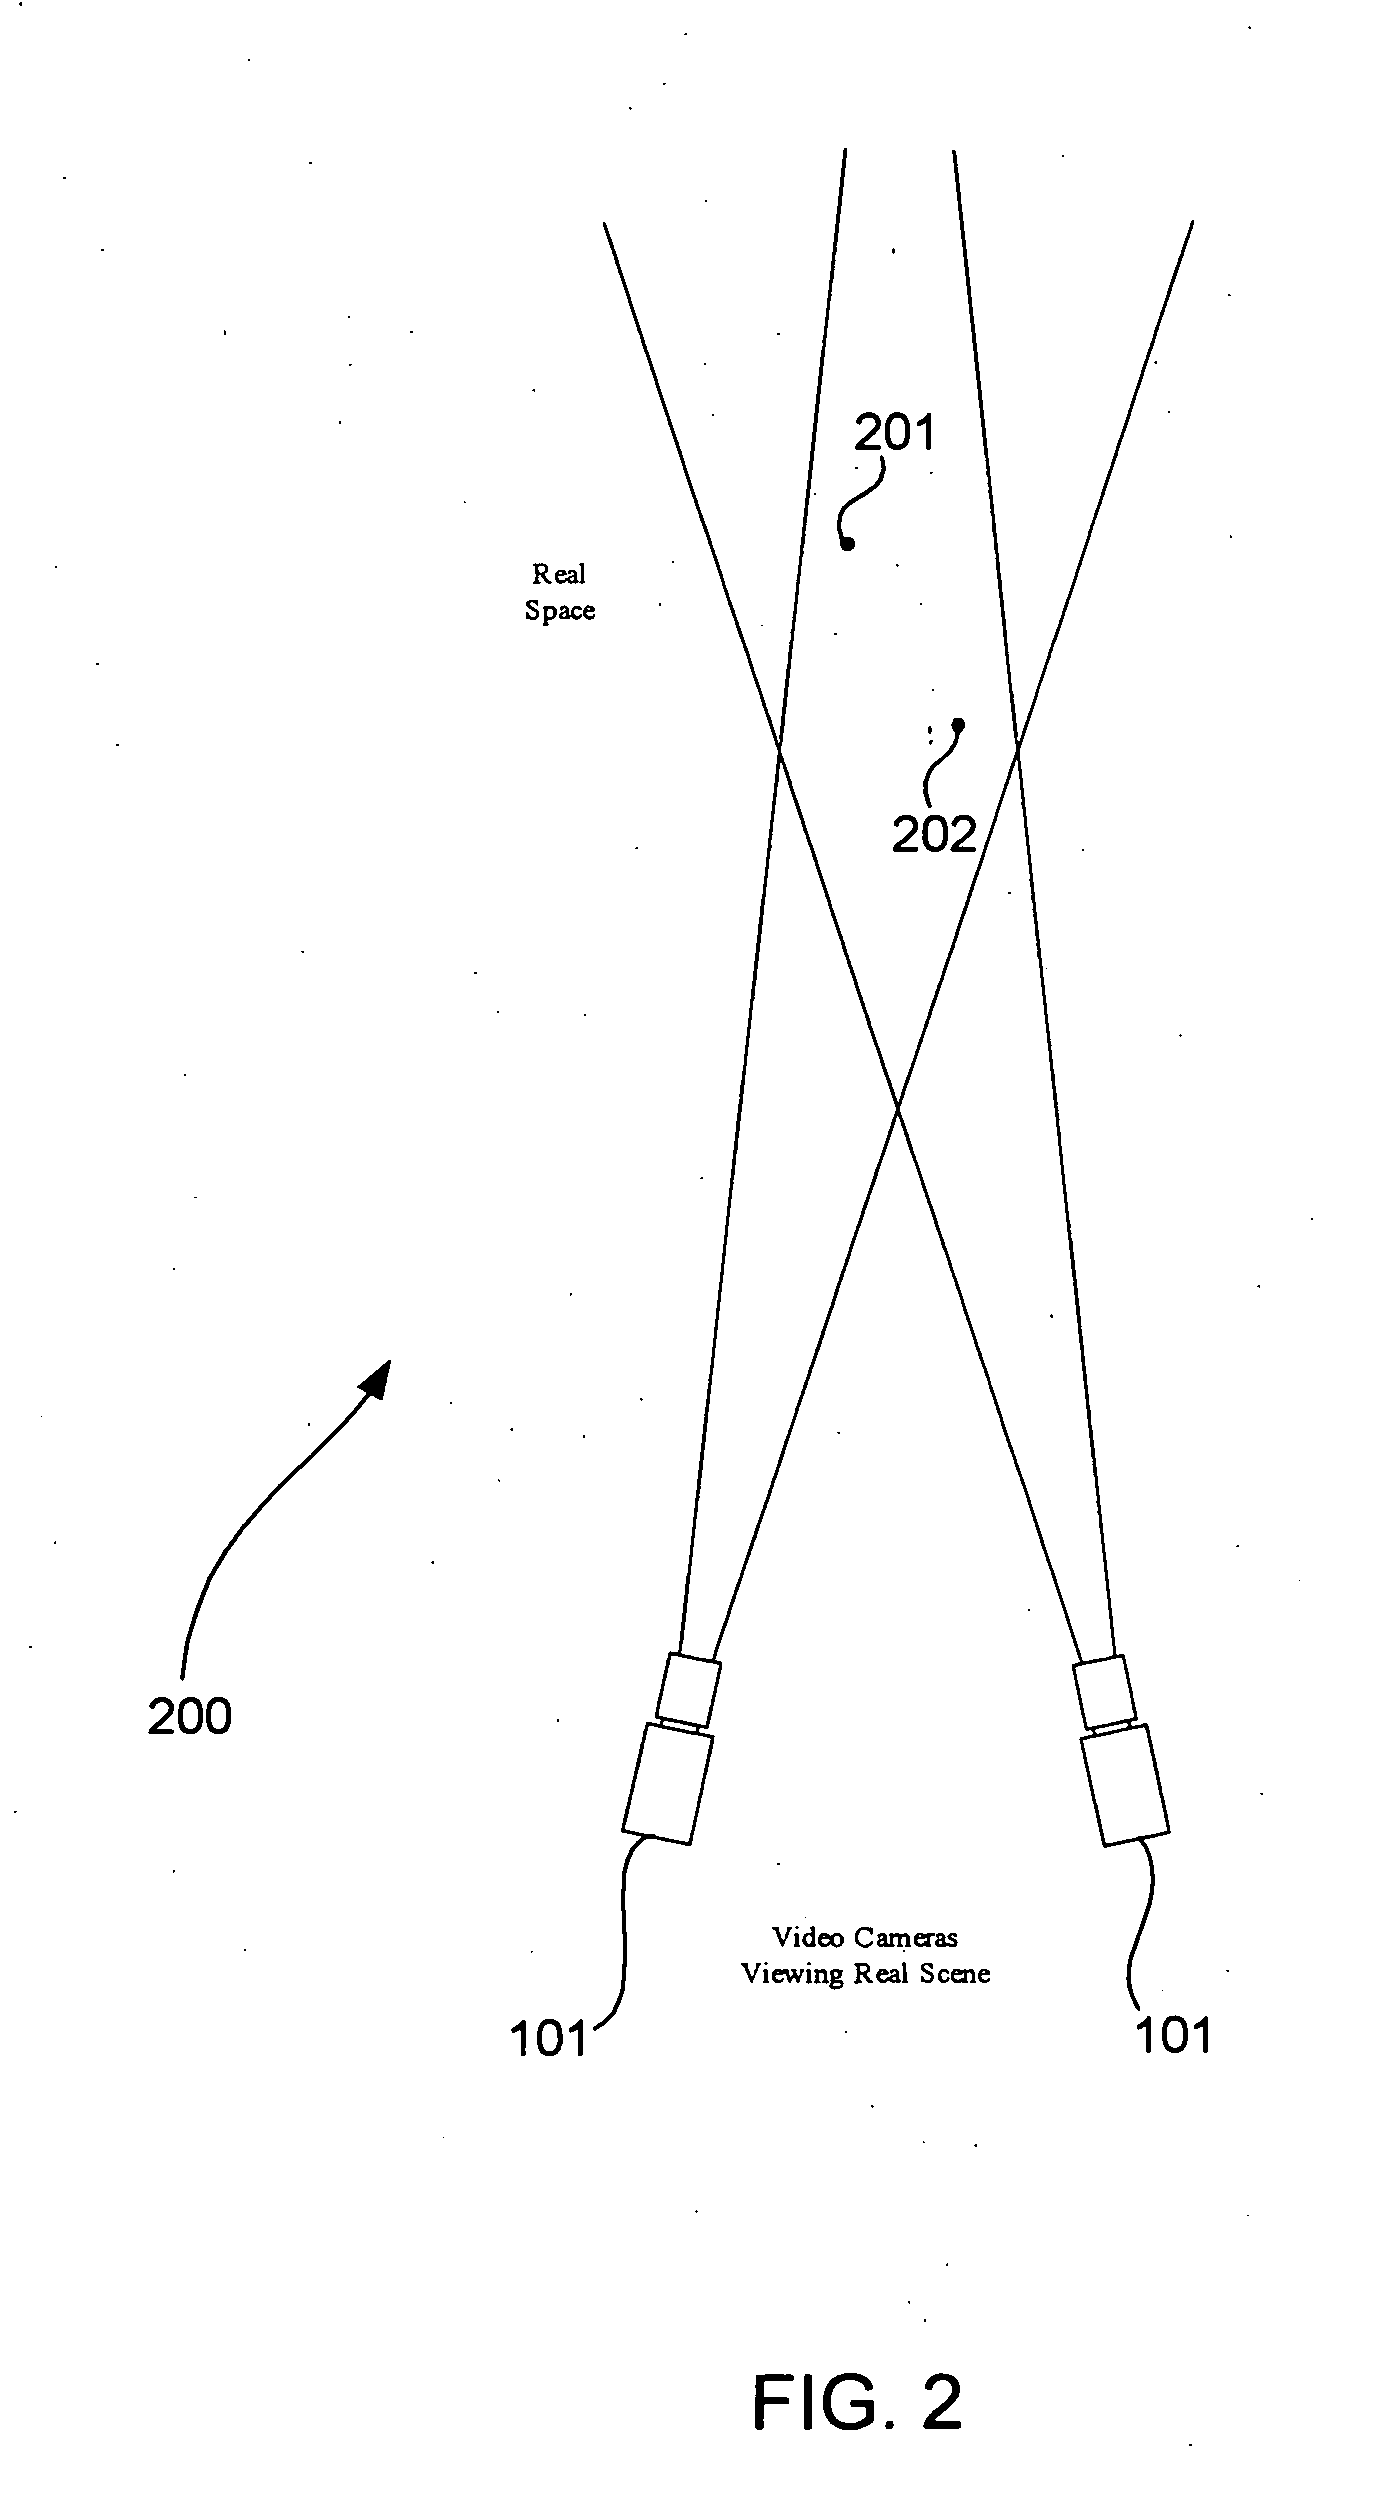 Systems and methods for eye-operated three-dimensional object location